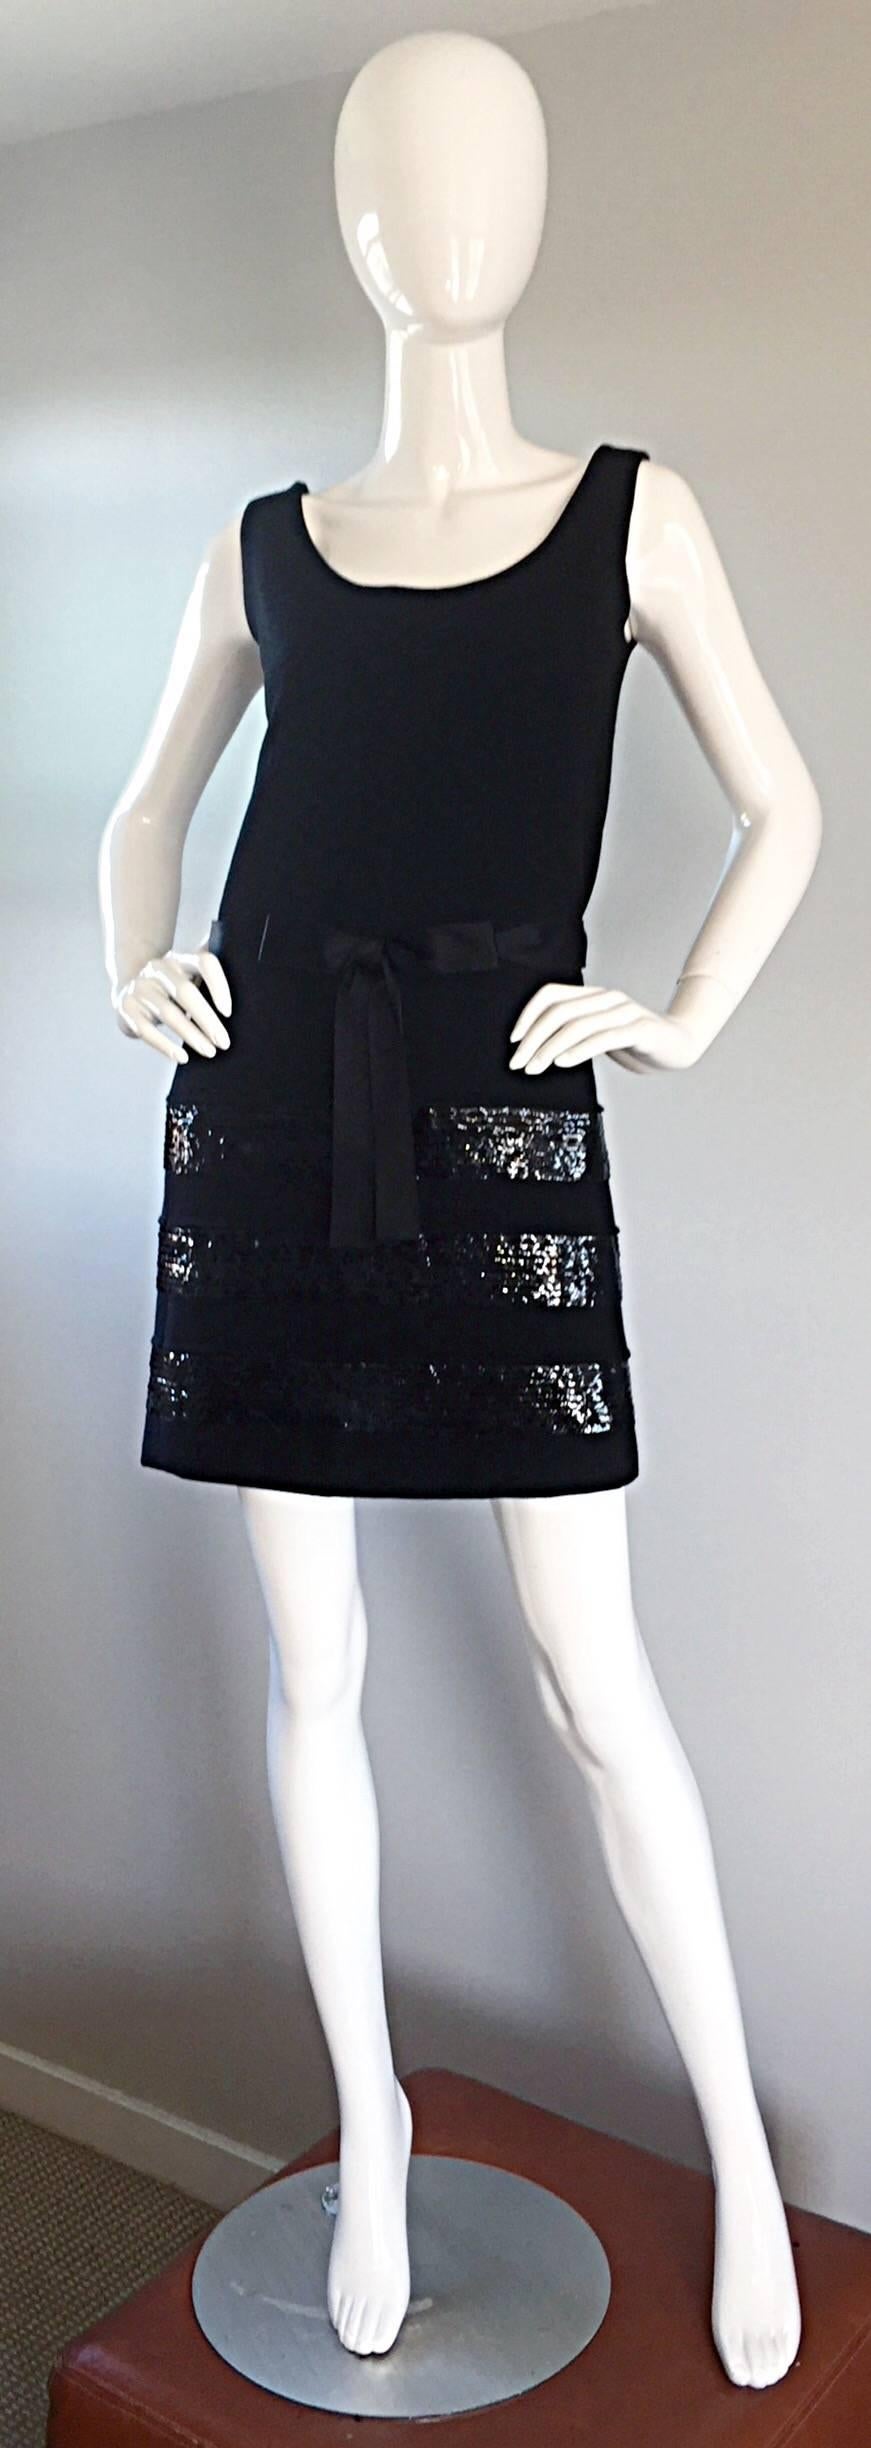 1960s Chester Weinberg Chic Vintage Black Wool + Sequins 60s Shift Dress w/ Bow For Sale 4